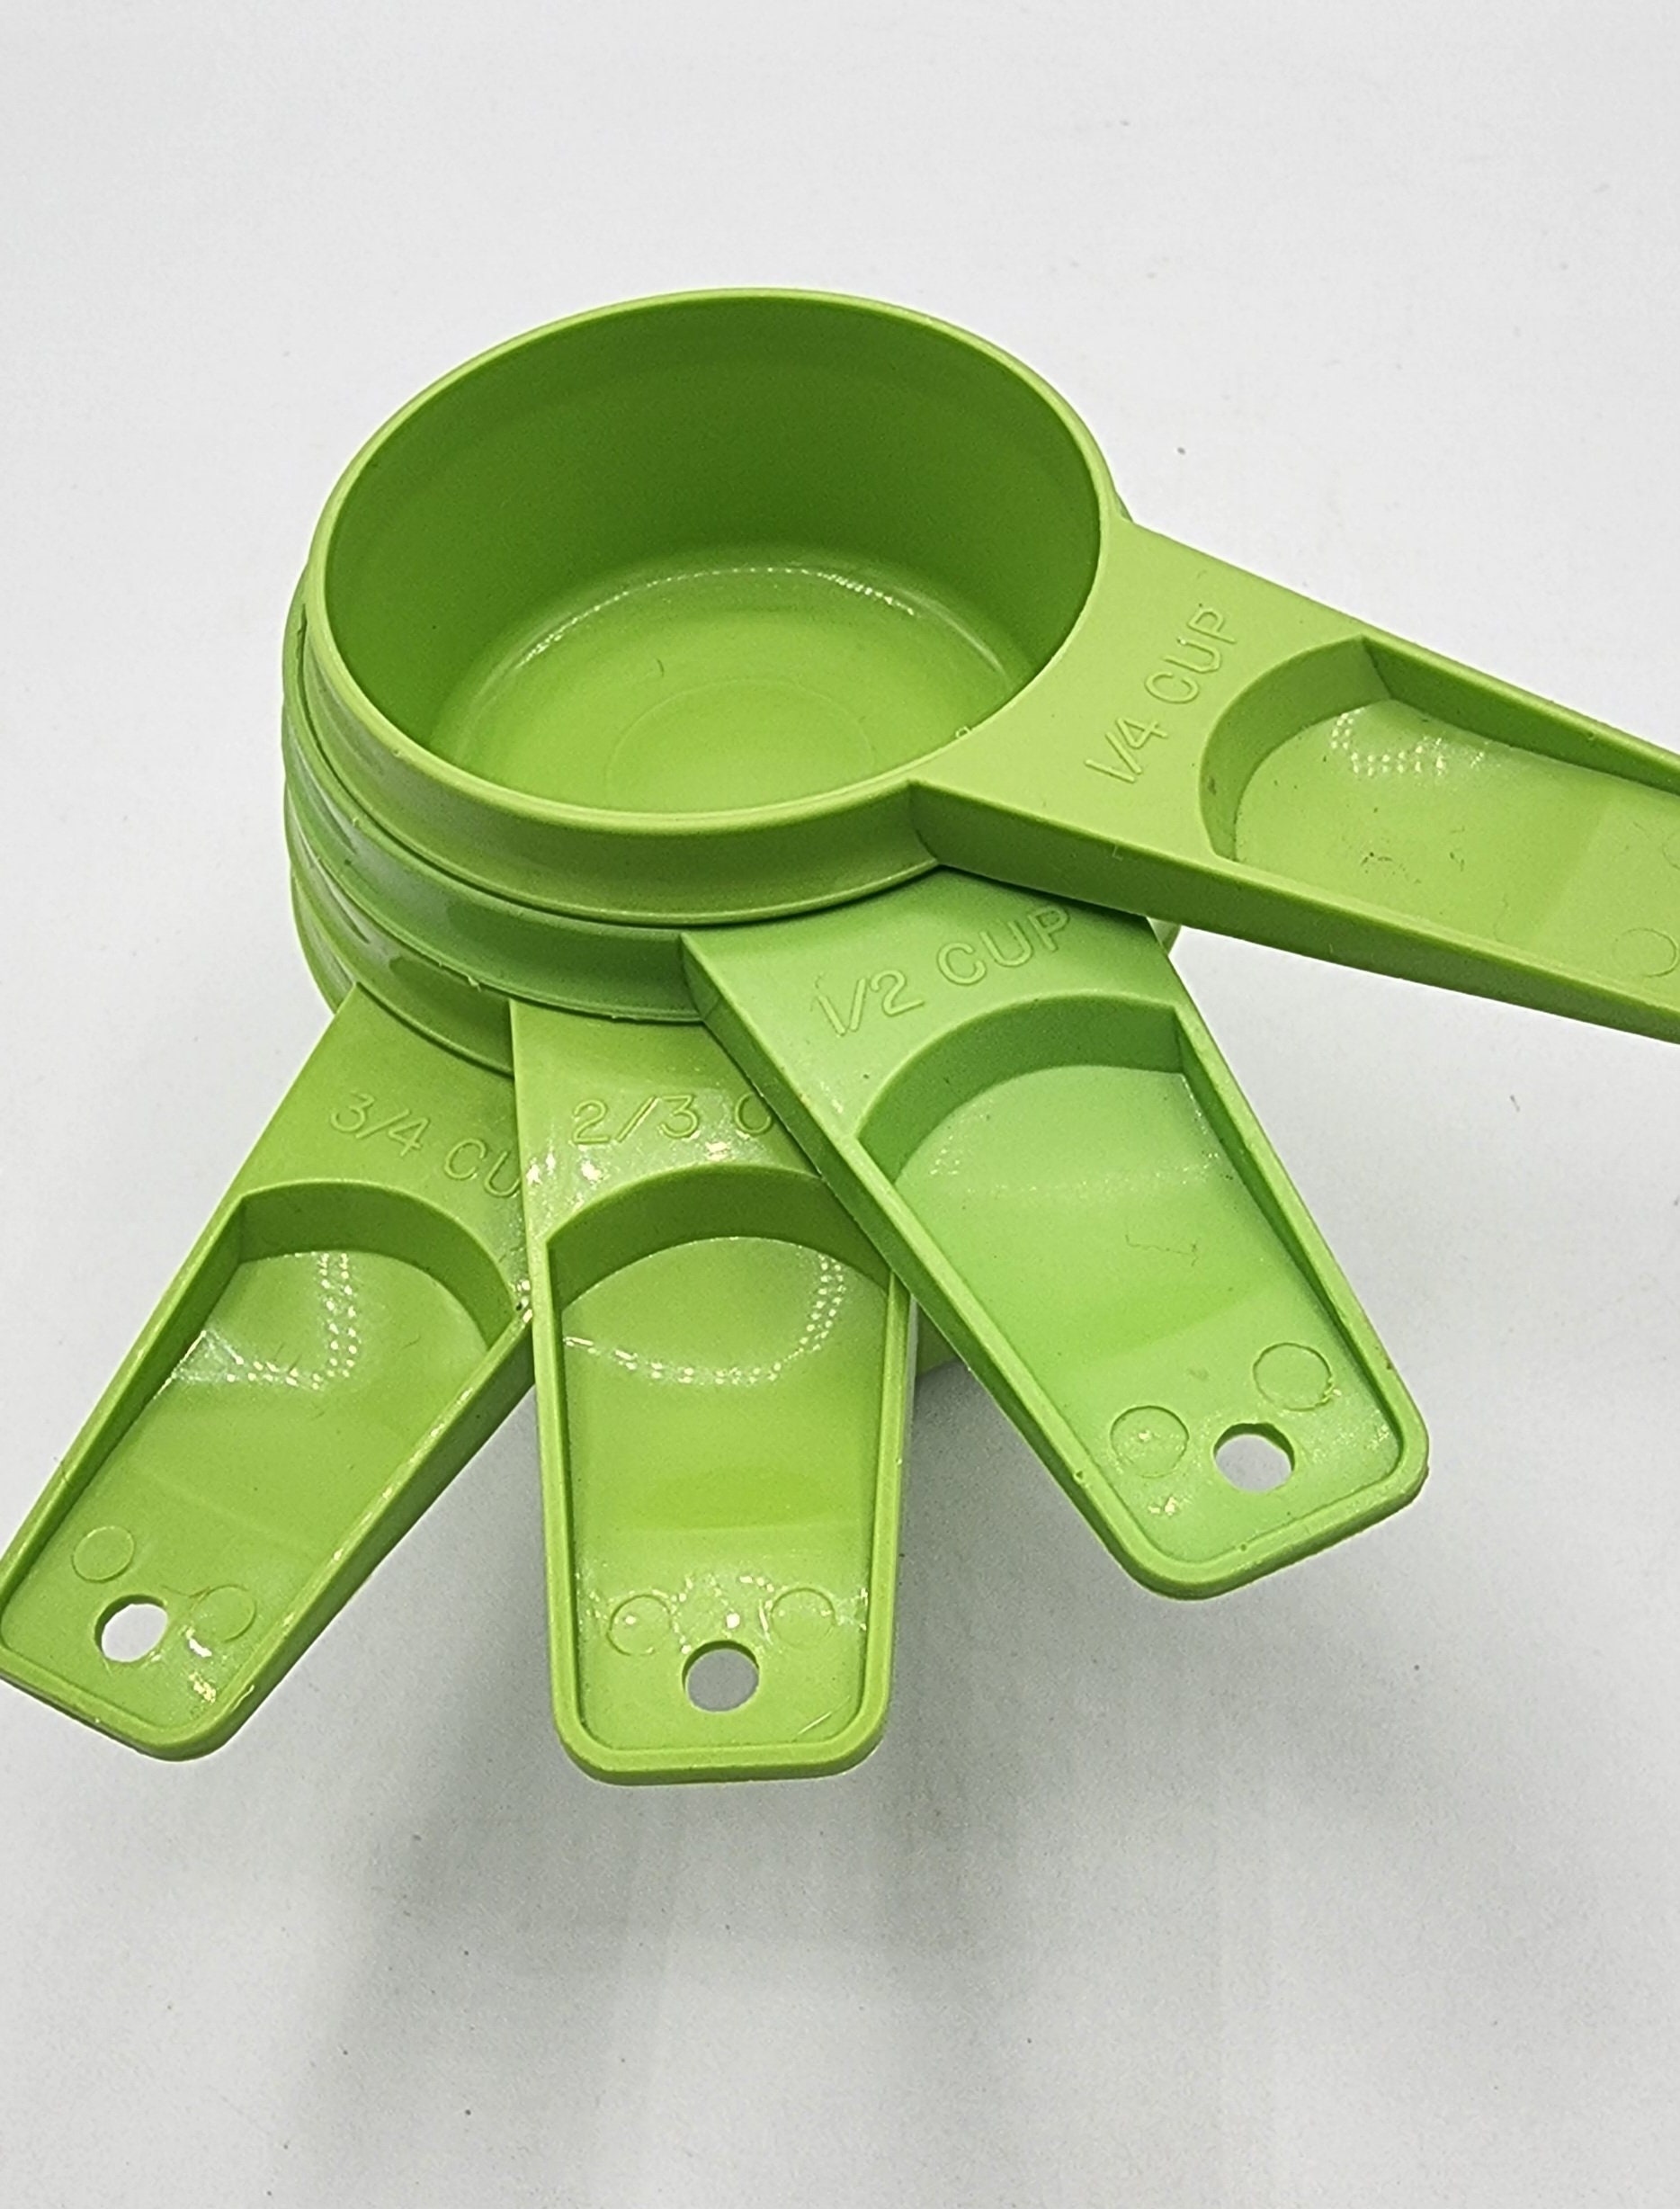 Vintage Plastic 4 Cup Measuring Cup, With Avocado Green Lid 